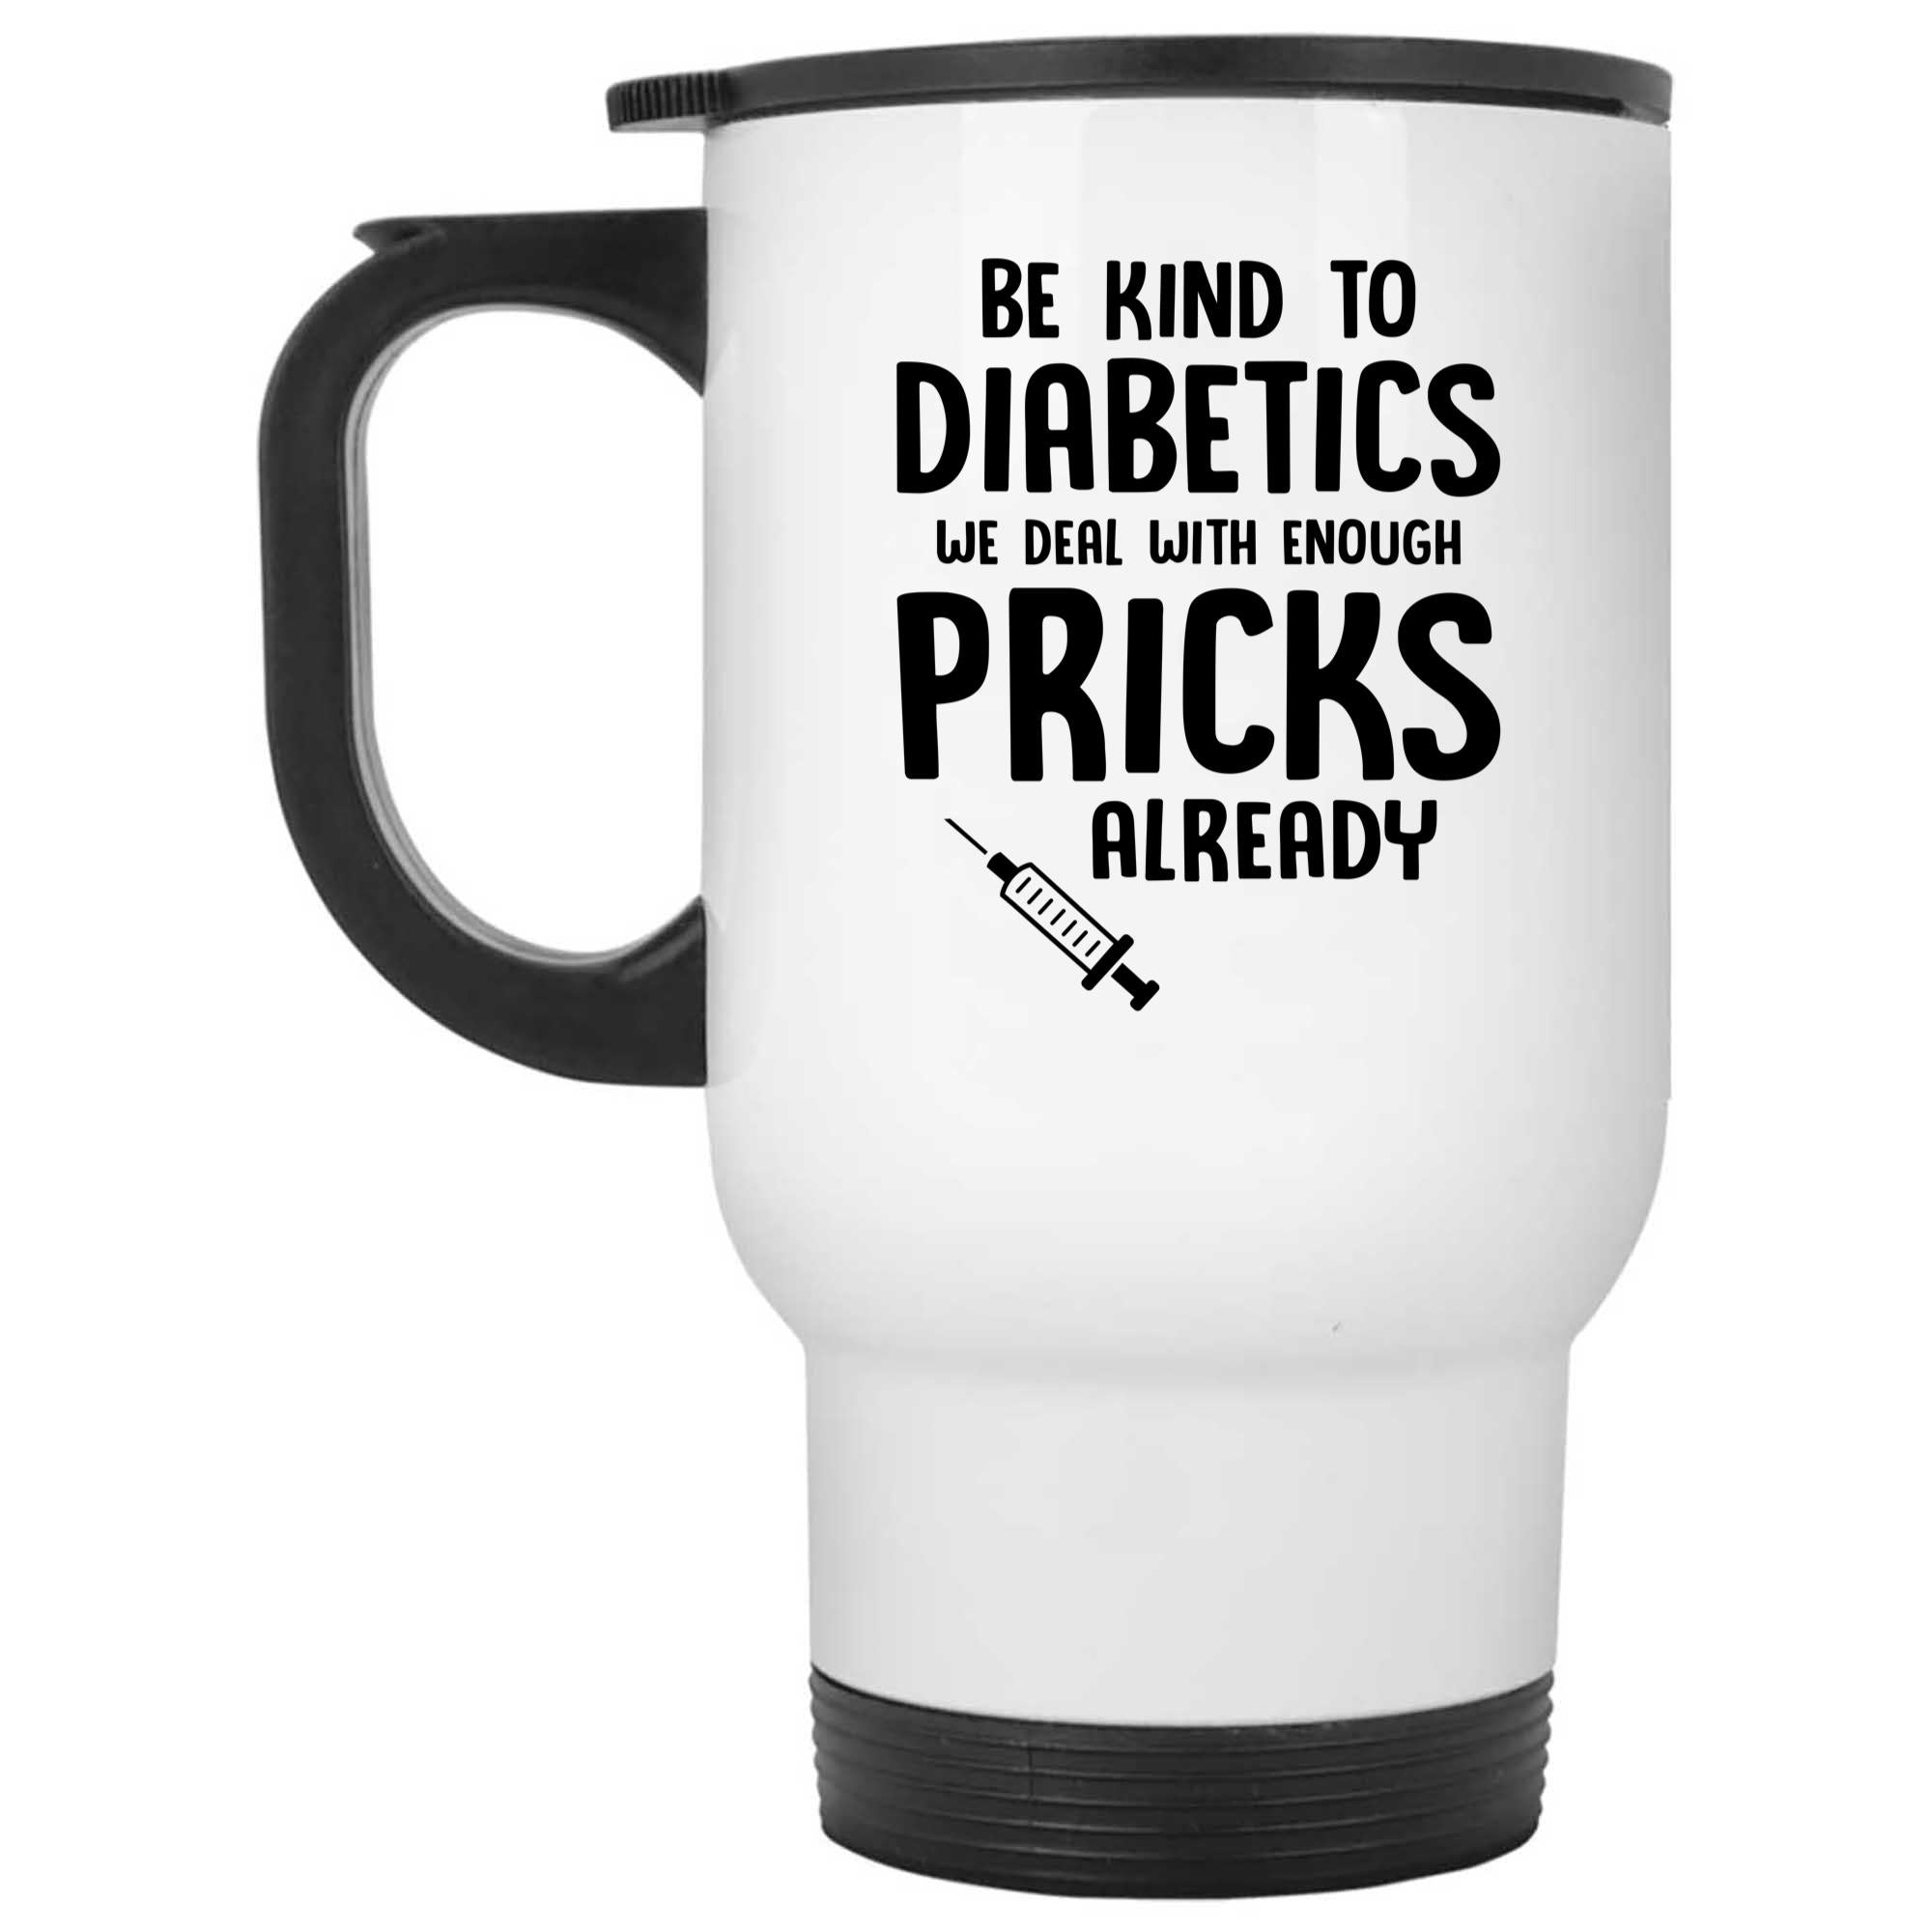 Skitongifts Funny Ceramic Novelty Coffee Mug Be Kind To Diabetics We Deal With Enough Pricks Already cr6TK9P